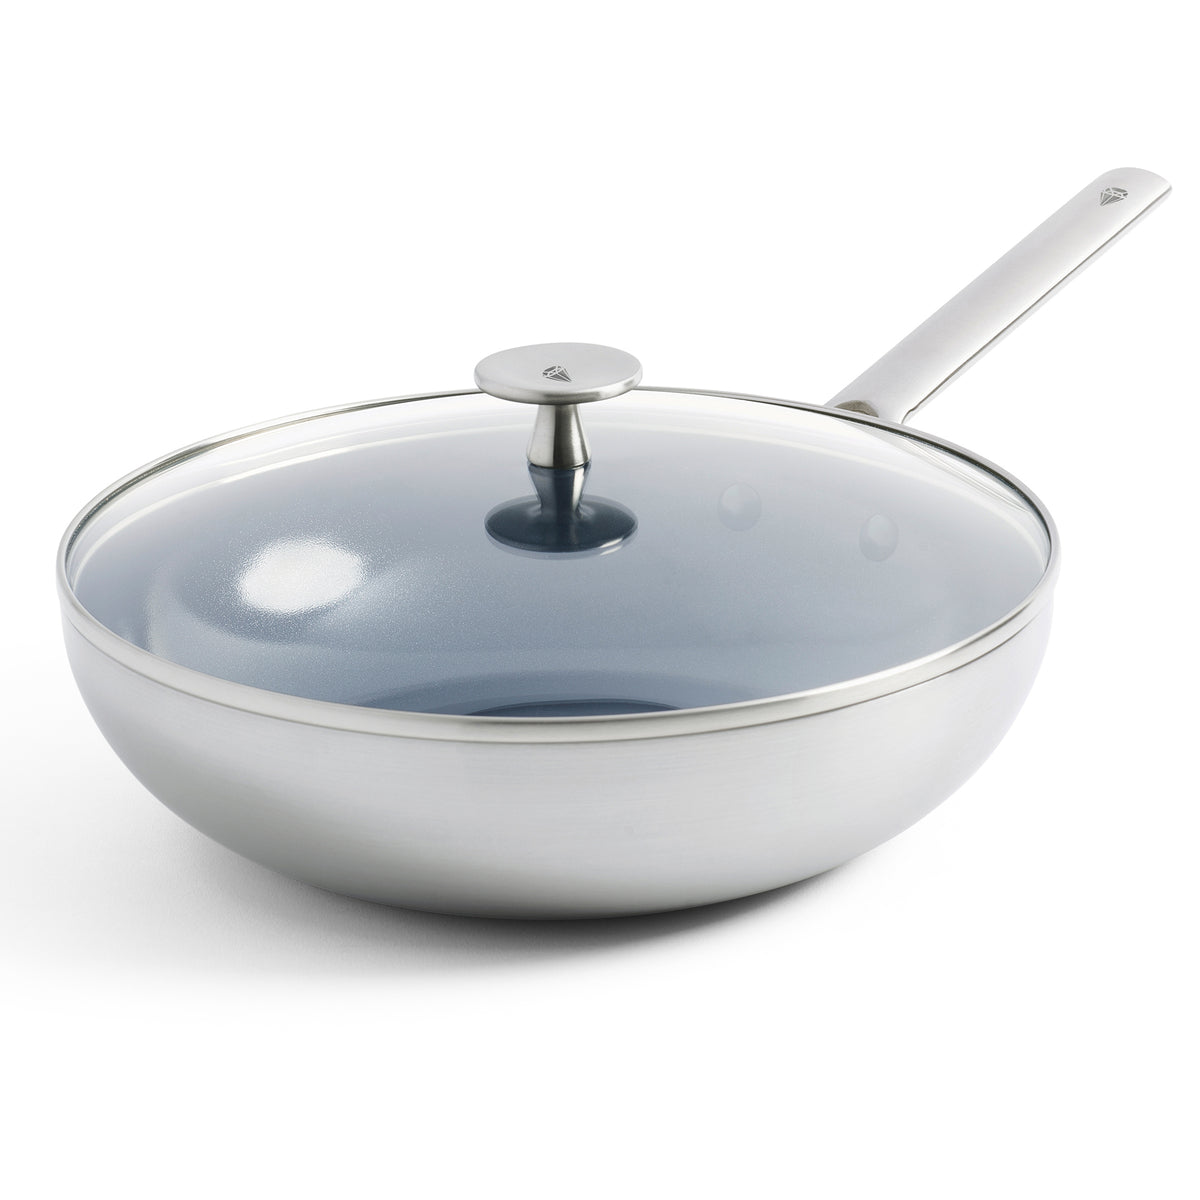 Blue Diamond Tri-Ply Stainless Steel Ceramic Nonstick 11-in. Wok Pan with Lid, 11